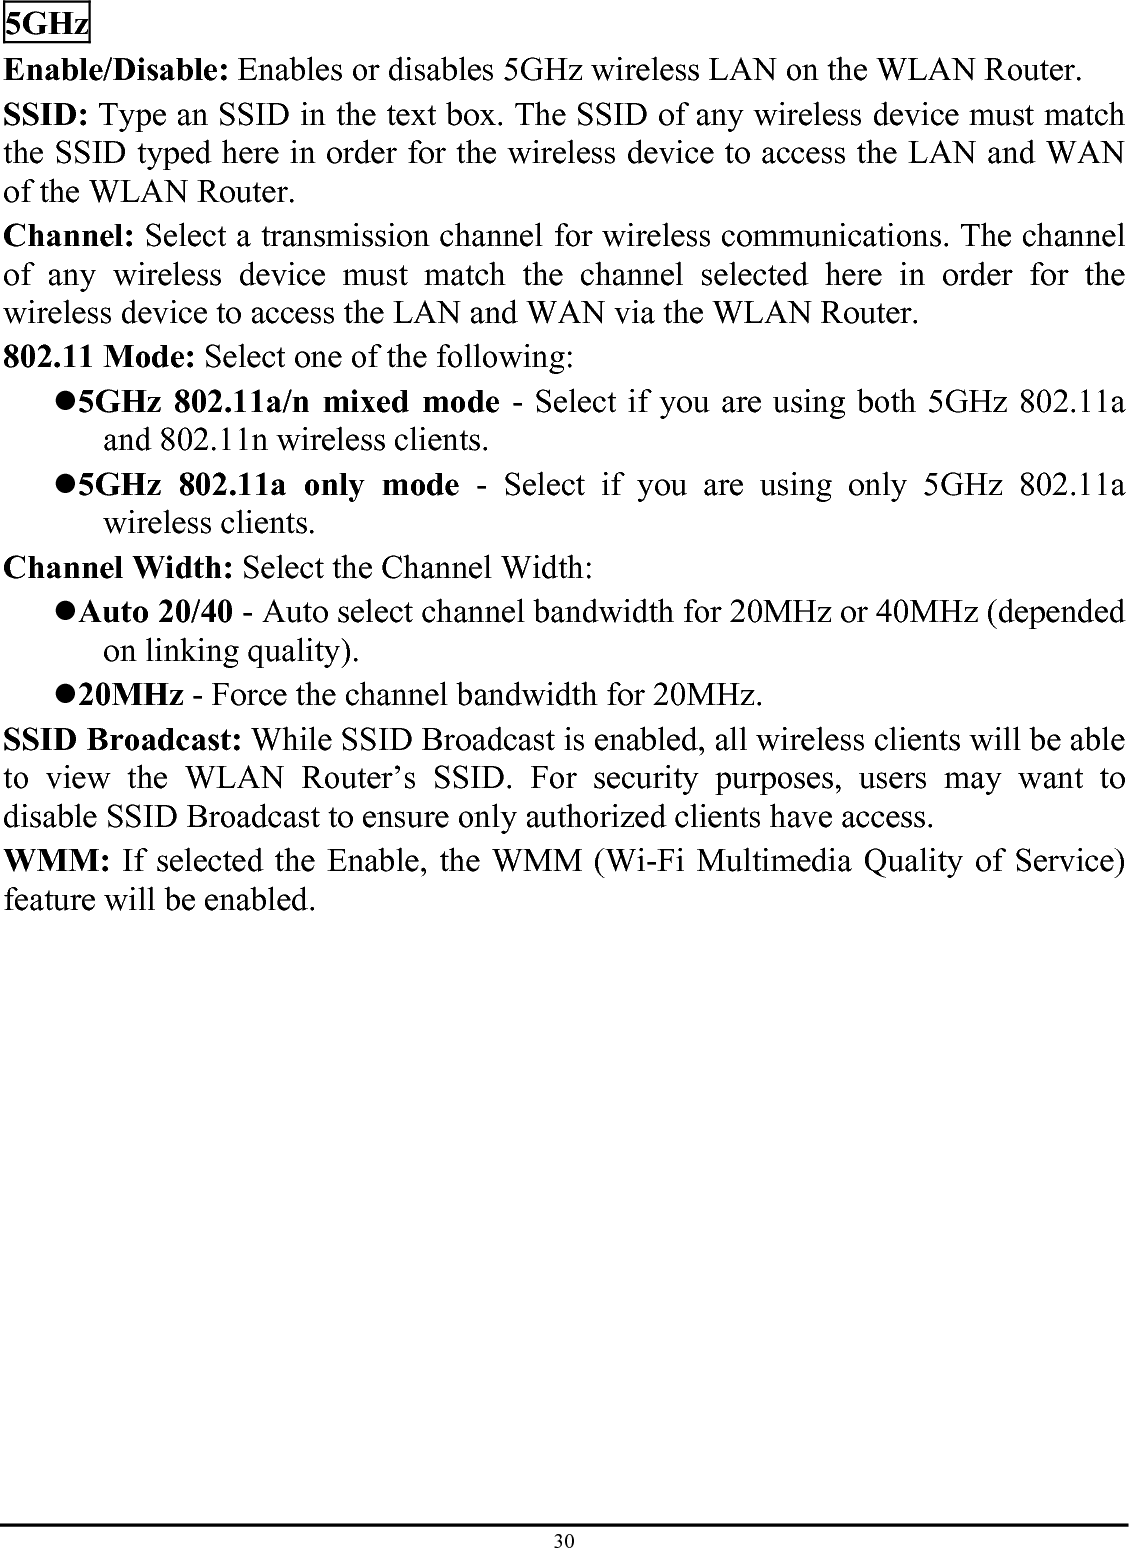 30 5GHz Enable/Disable: Enables or disables 5GHz wireless LAN on the WLAN Router. SSID: Type an SSID in the text box. The SSID of any wireless device must match the SSID typed here in order for the wireless device to access the LAN and WAN of the WLAN Router. Channel: Select a transmission channel for wireless communications. The channel of any wireless device must match the channel selected here in order for the wireless device to access the LAN and WAN via the WLAN Router. 802.11 Mode: Select one of the following: z 5GHz 802.11a/n mixed mode - Select if you are using both 5GHz 802.11a and 802.11n wireless clients. z 5GHz 802.11a only mode - Select if you are using only 5GHz 802.11a wireless clients. Channel Width: Select the Channel Width: z Auto 20/40 - Auto select channel bandwidth for 20MHz or 40MHz (depended on linking quality). z 20MHz - Force the channel bandwidth for 20MHz.  SSID Broadcast: While SSID Broadcast is enabled, all wireless clients will be able to view the WLAN Router’s SSID. For security purposes, users may want to disable SSID Broadcast to ensure only authorized clients have access. WMM: If selected the Enable, the WMM (Wi-Fi Multimedia Quality of Service) feature will be enabled.   